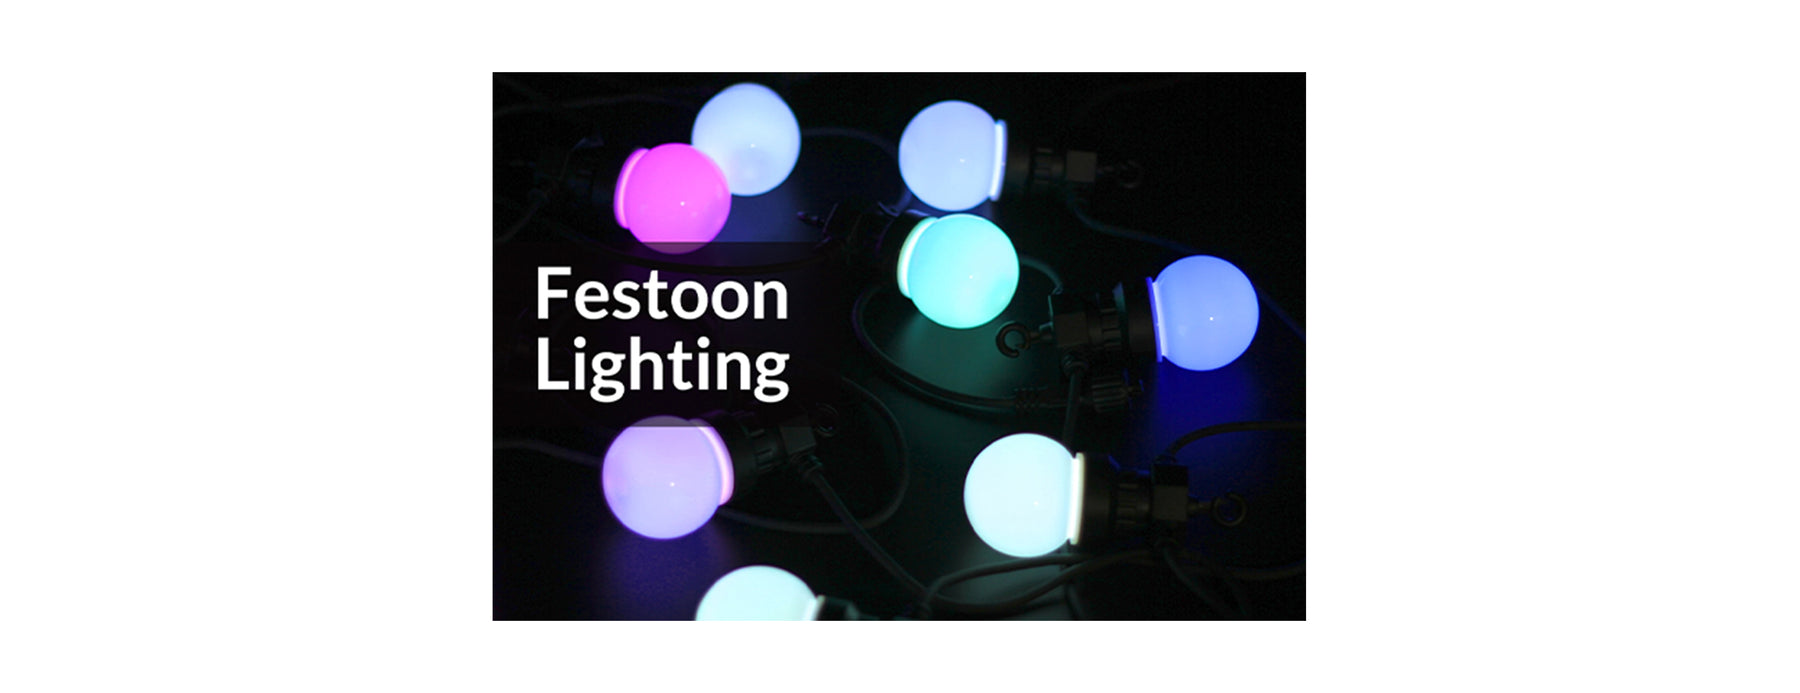 Everything You Need to Know About Festoon Lighting